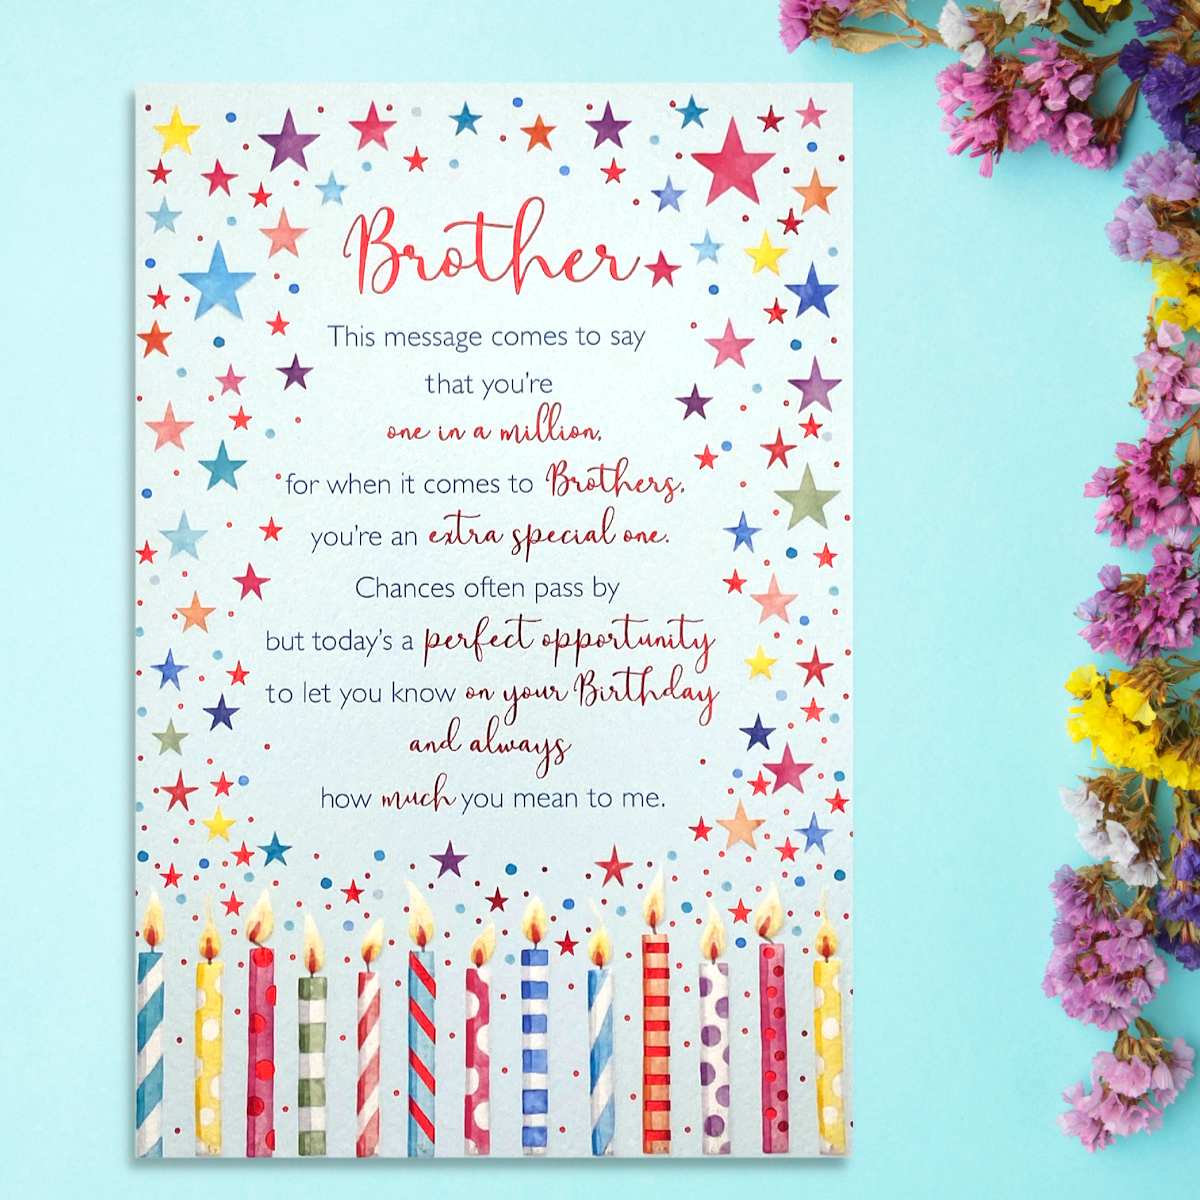 Front image showing candles, multicolour star border and verse